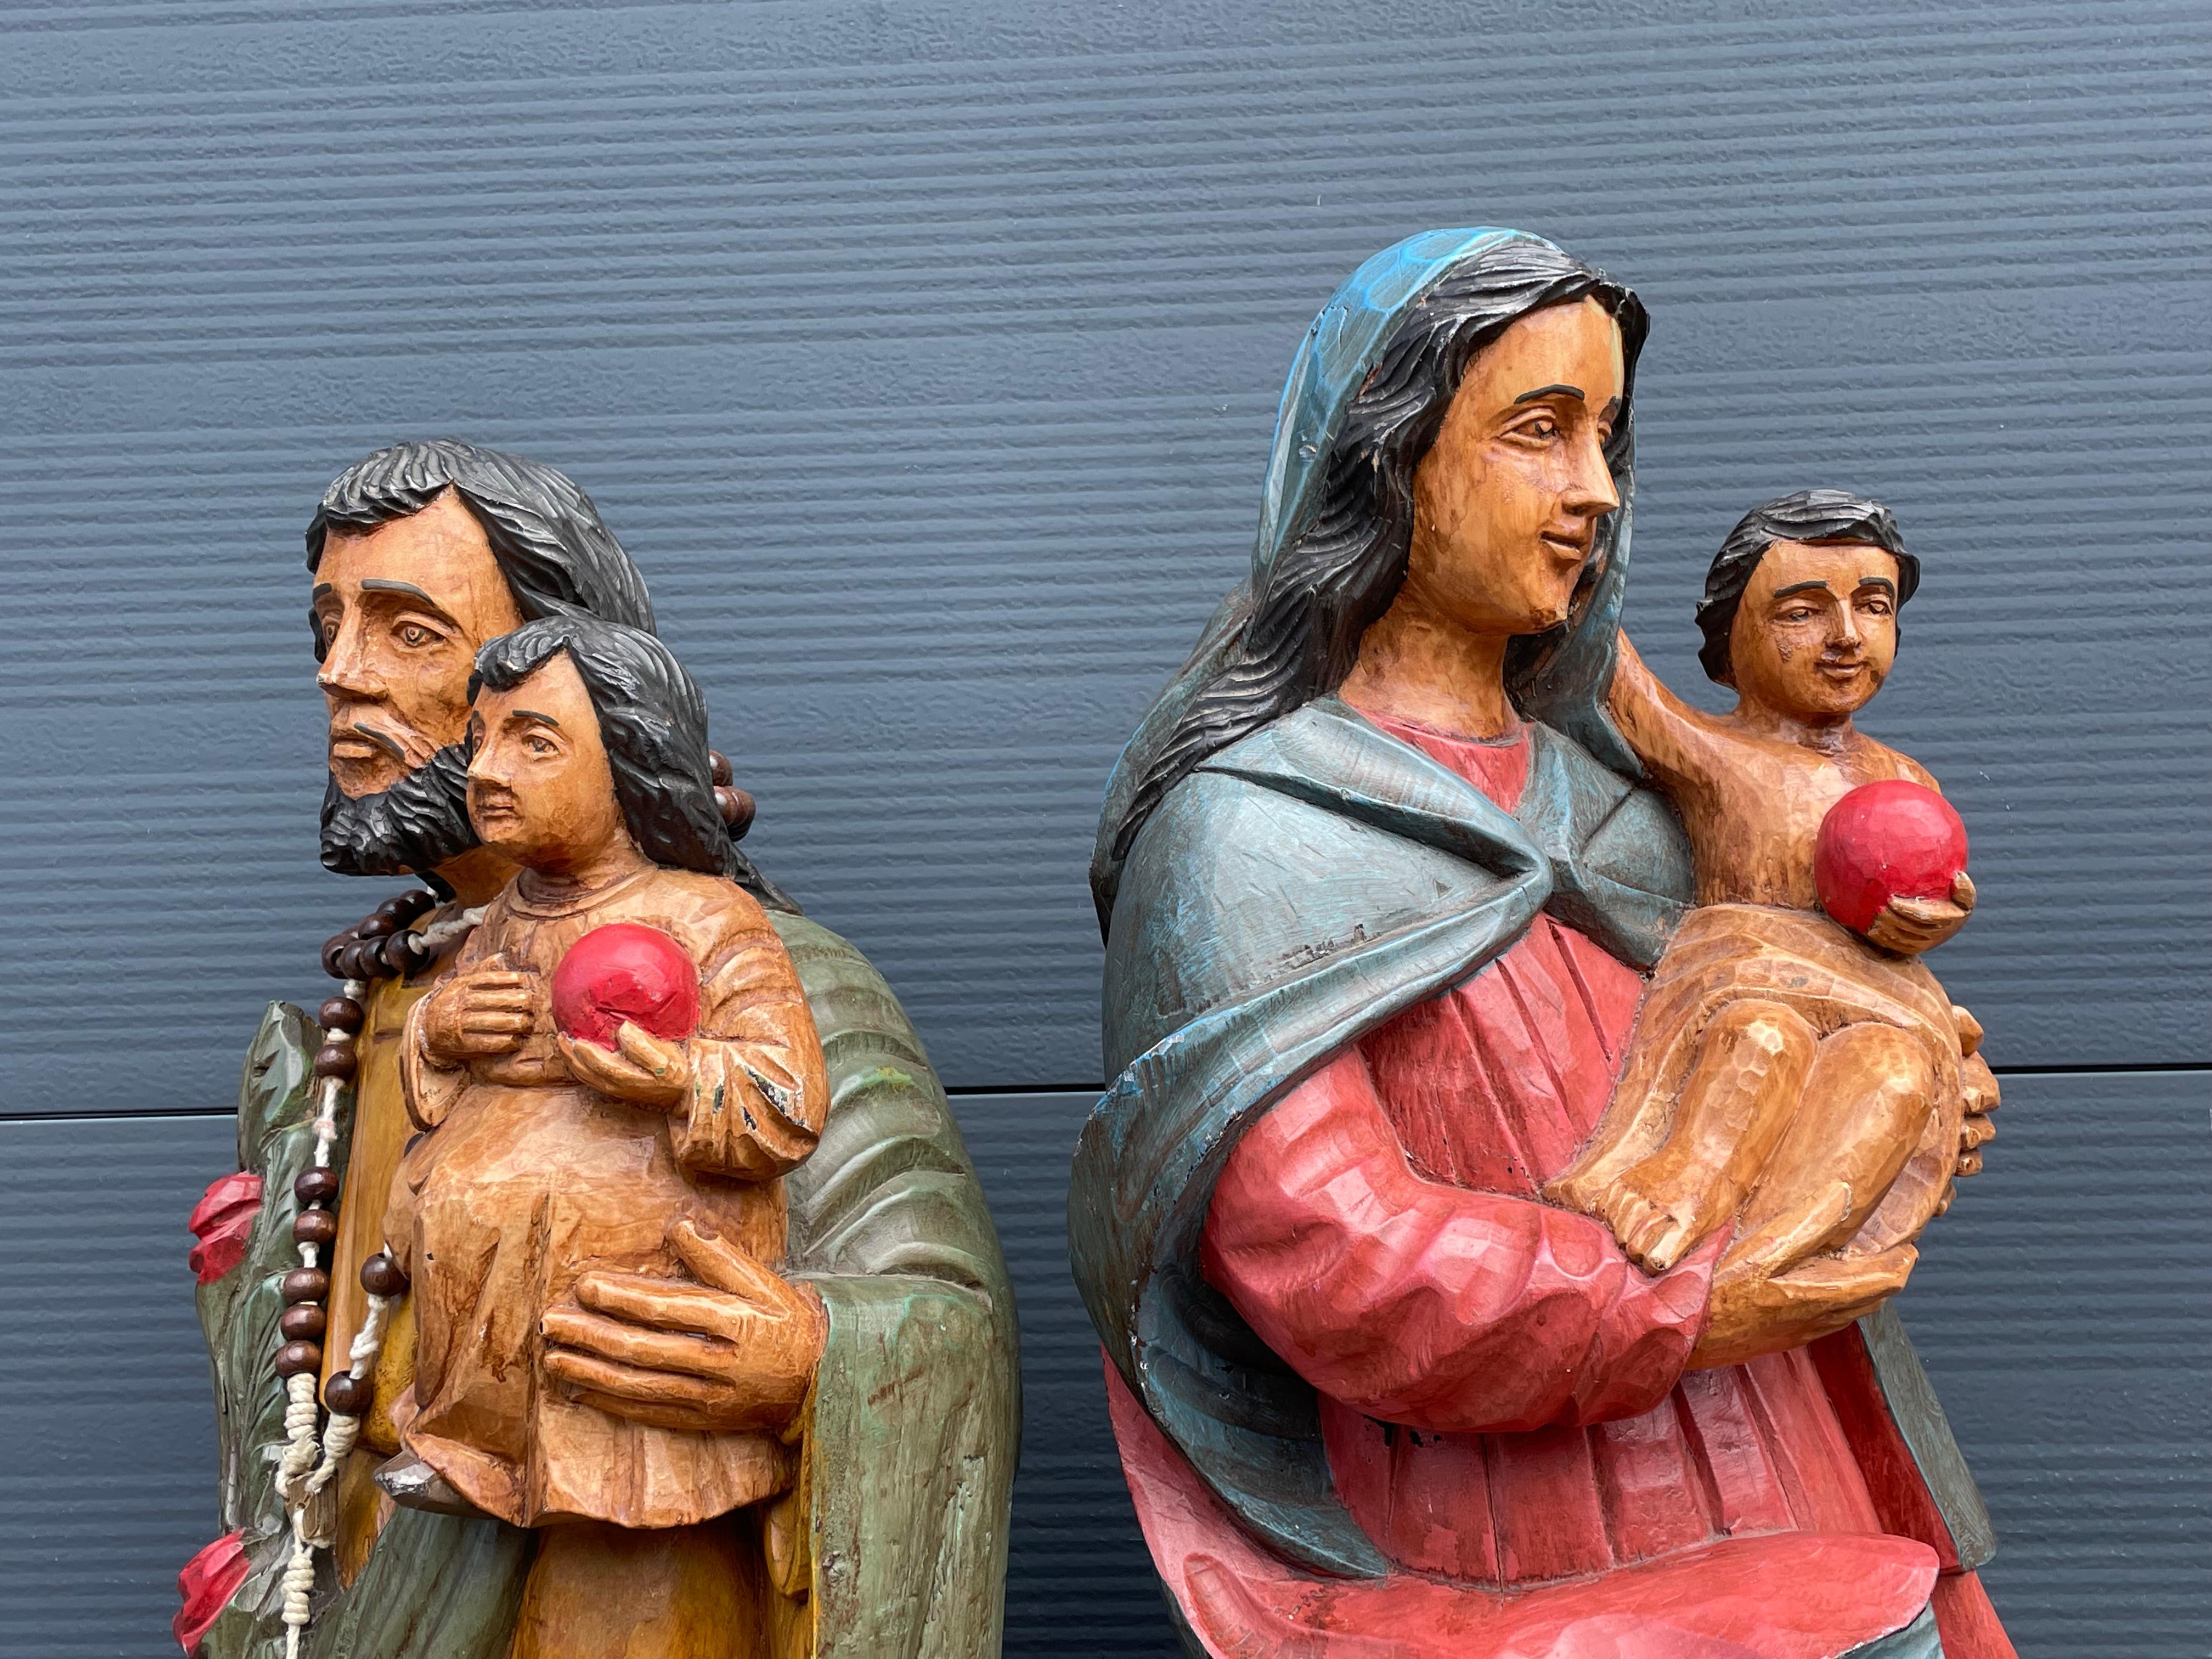 Large Pair of Hand Carved Wooden Mary & Joseph Sculptures, Both with Child Jesus (Neorenaissance) im Angebot